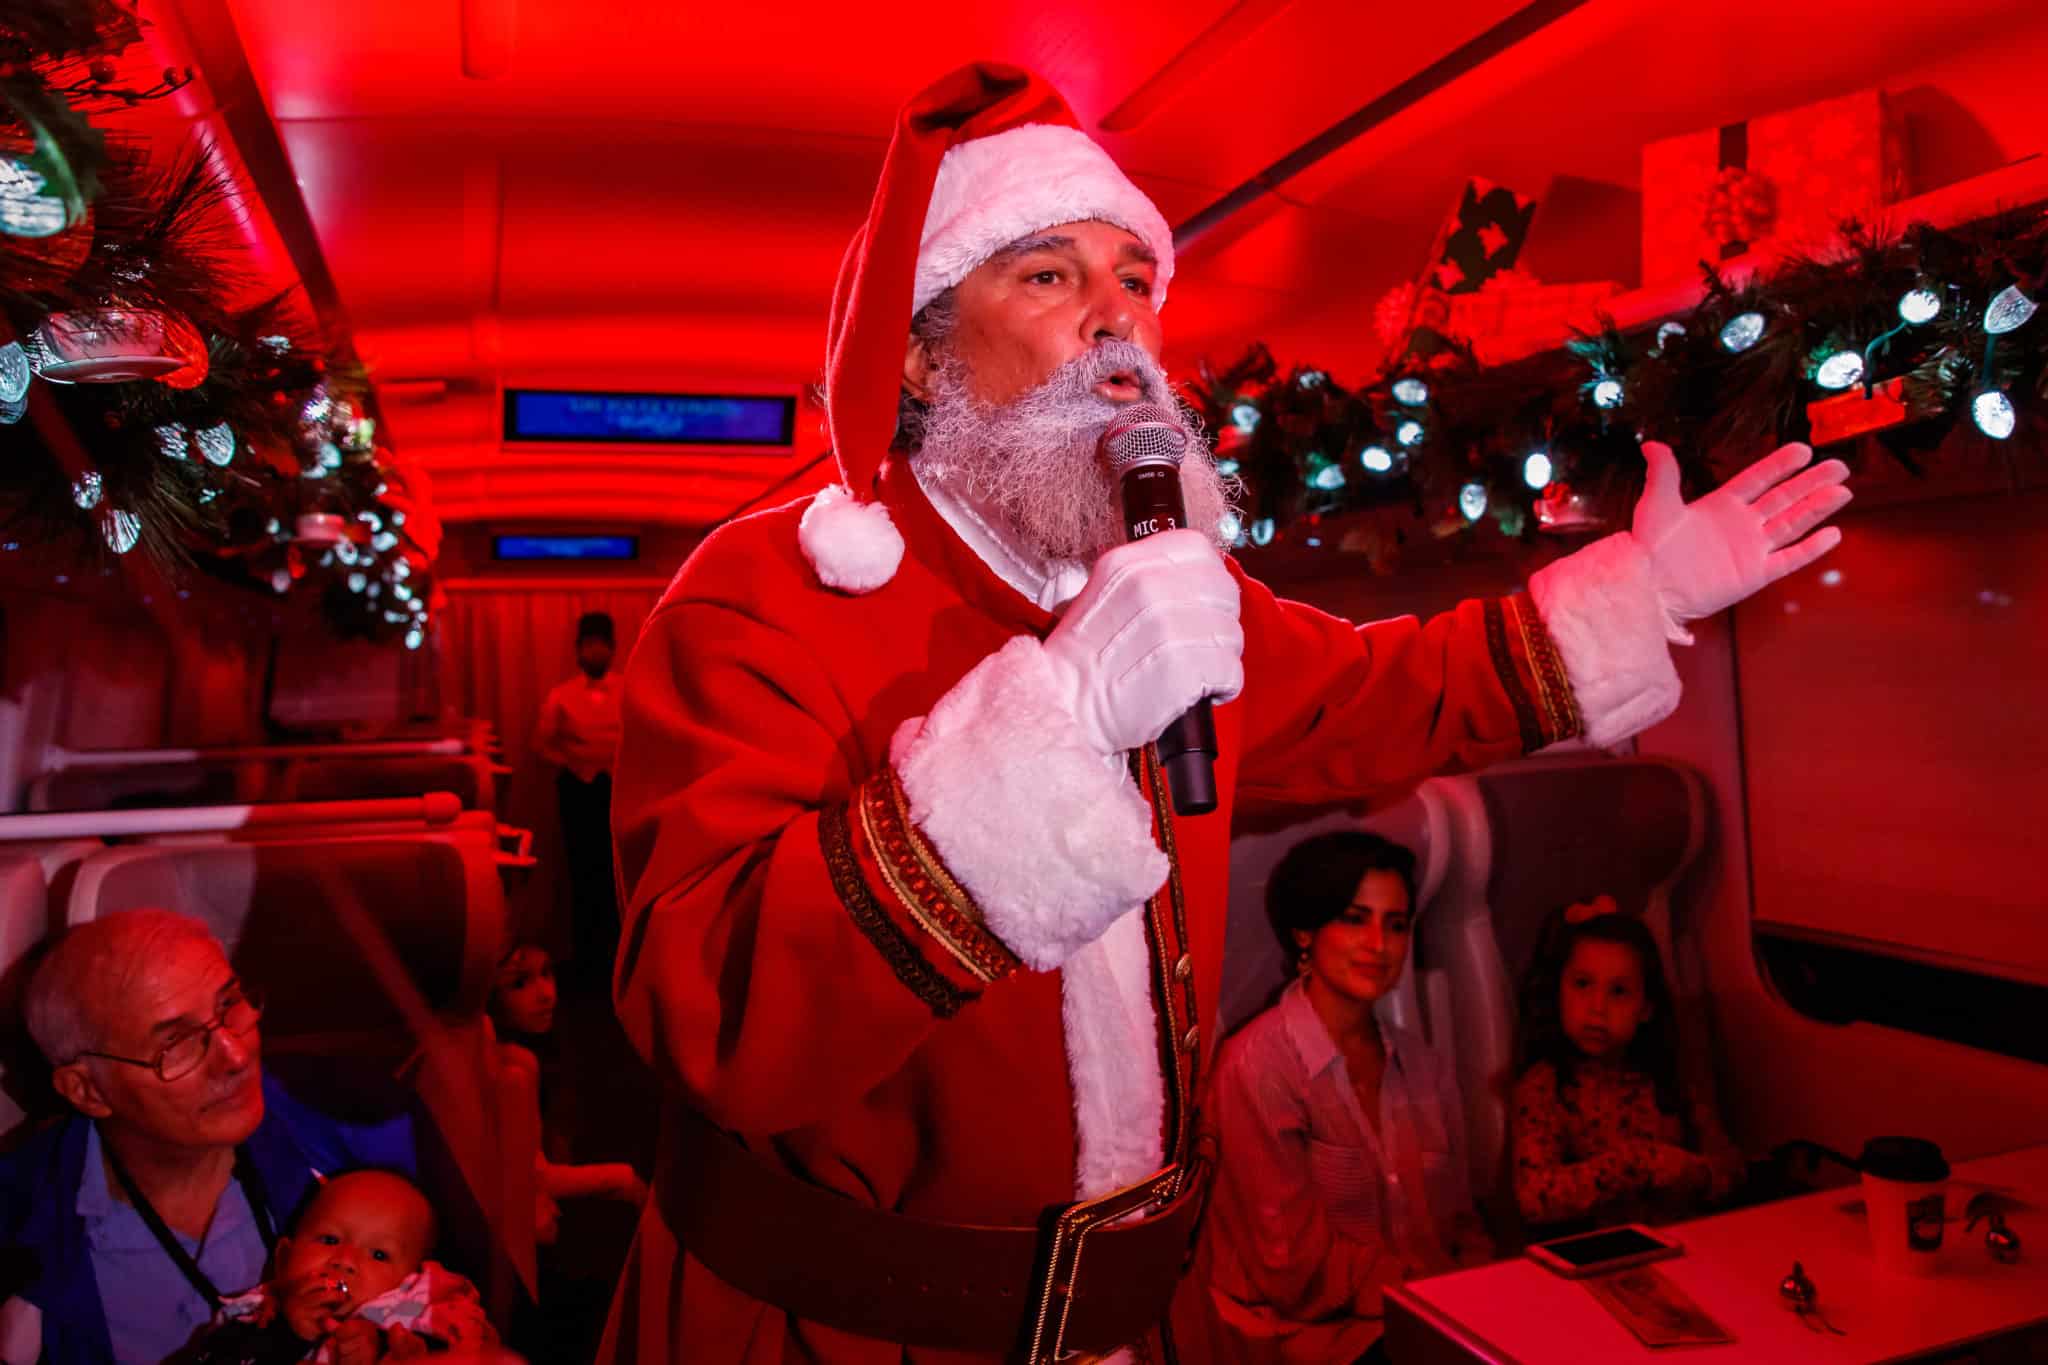 Santa Claus speaking to guests aboard the train